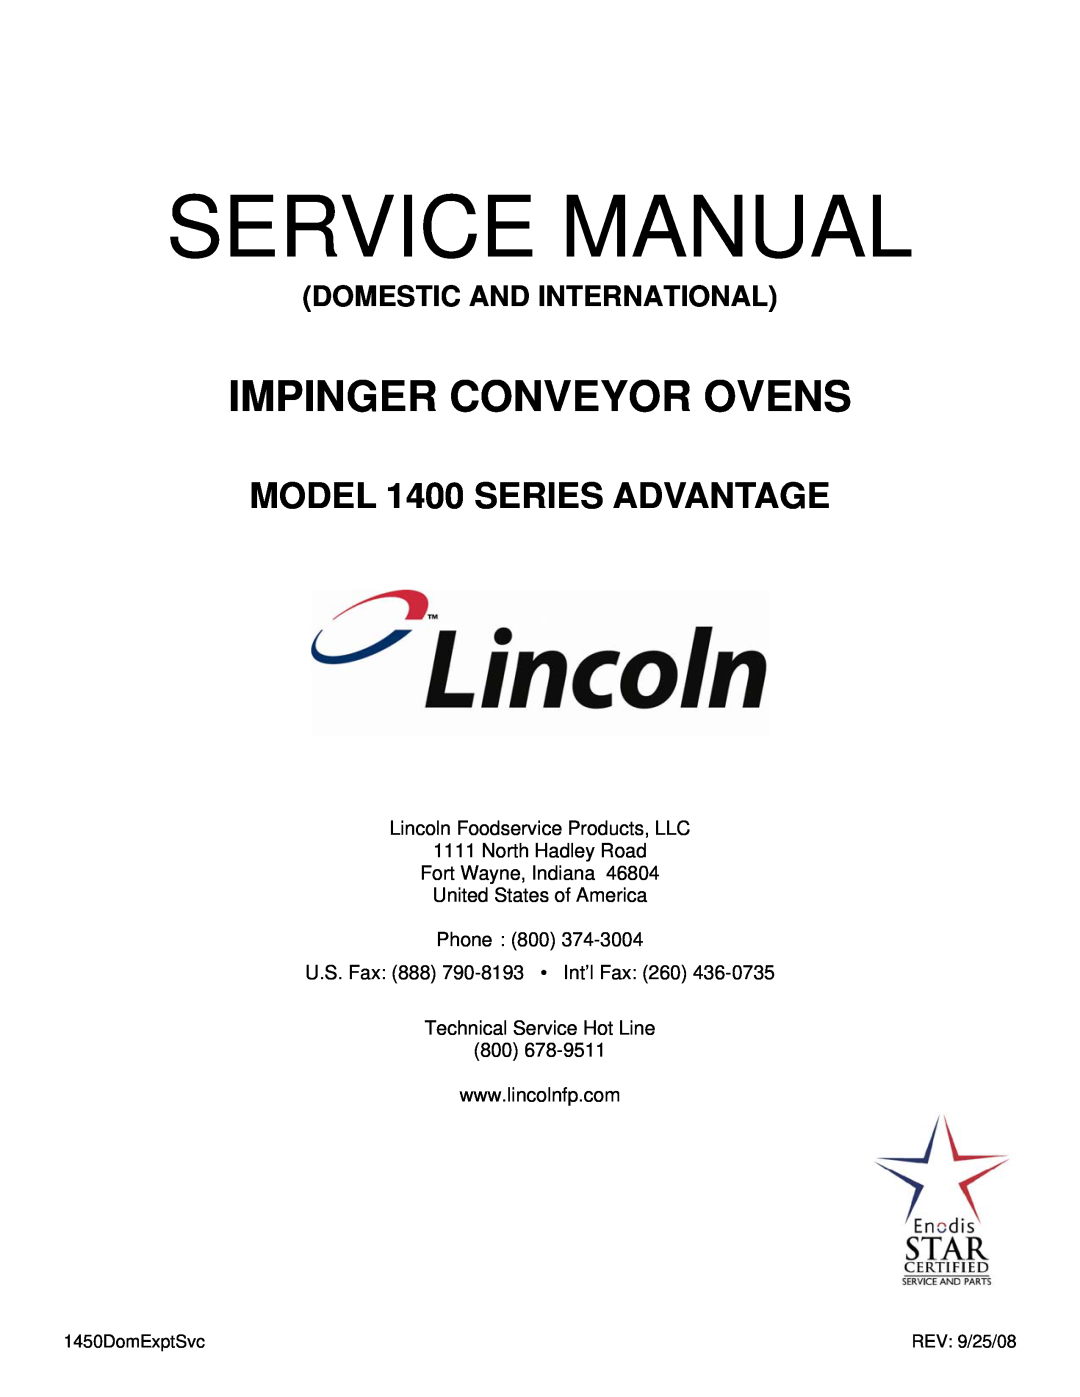 Lincoln 1400 Series service manual Domestic And International, Lincoln Foodservice Products, LLC 1111 North Hadley Road 